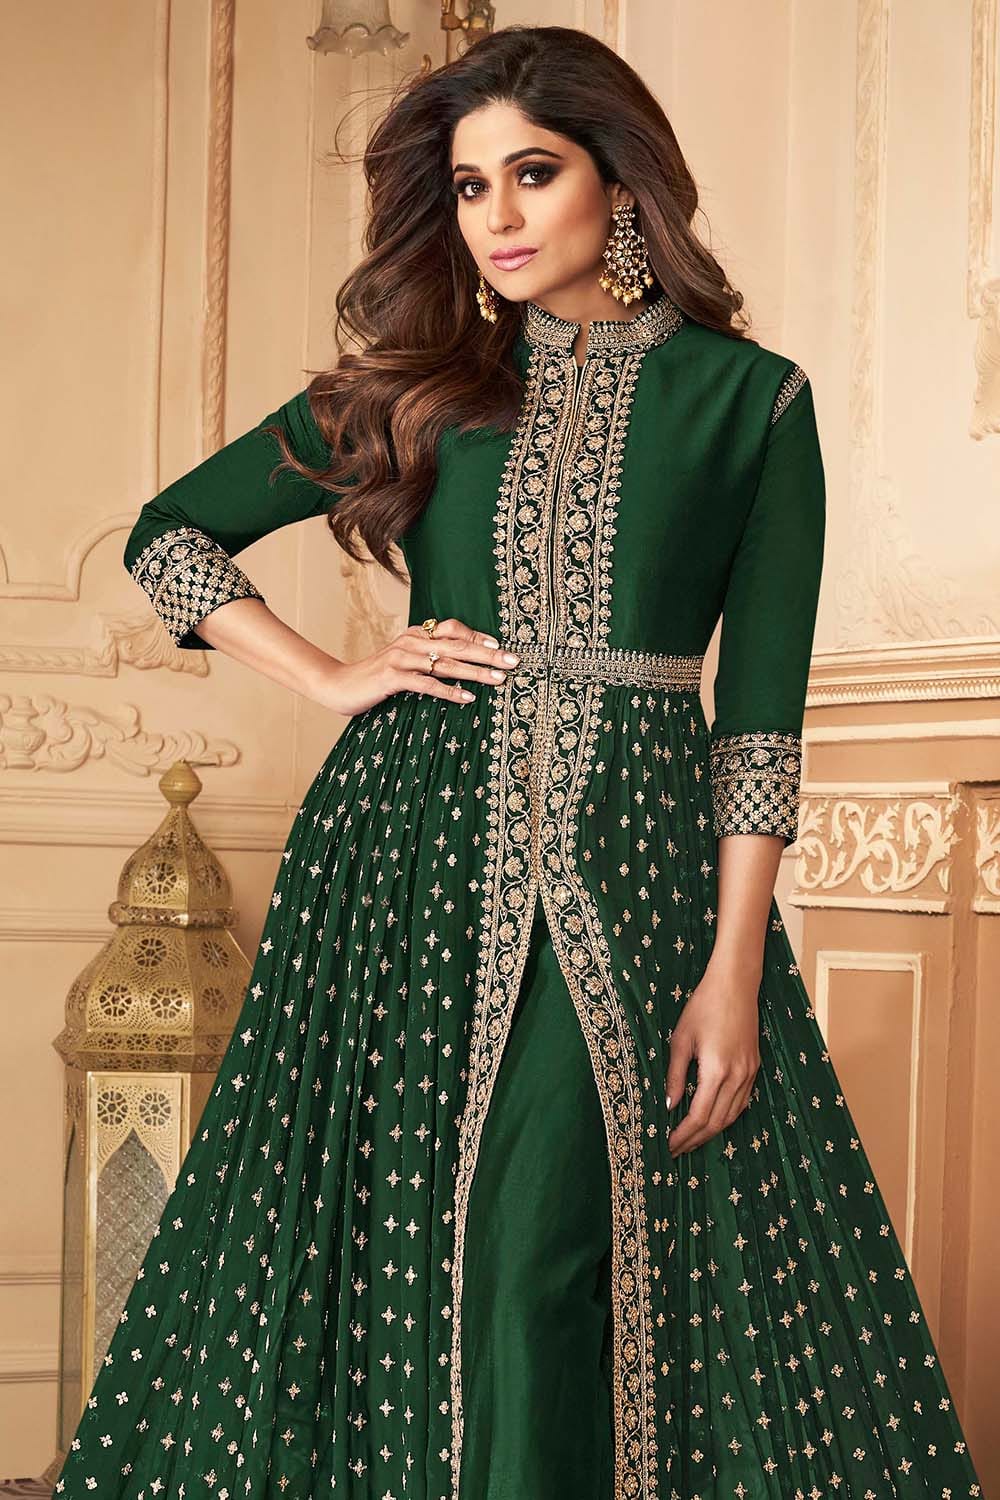 FERN GREEN ANARKALI GOWN SET WITH DORI THREAD WORK AND SILVER  EMBELLISHMENTS PAIRED WITH A MATCHING DUPATTA AND TASSELS. - Seasons India